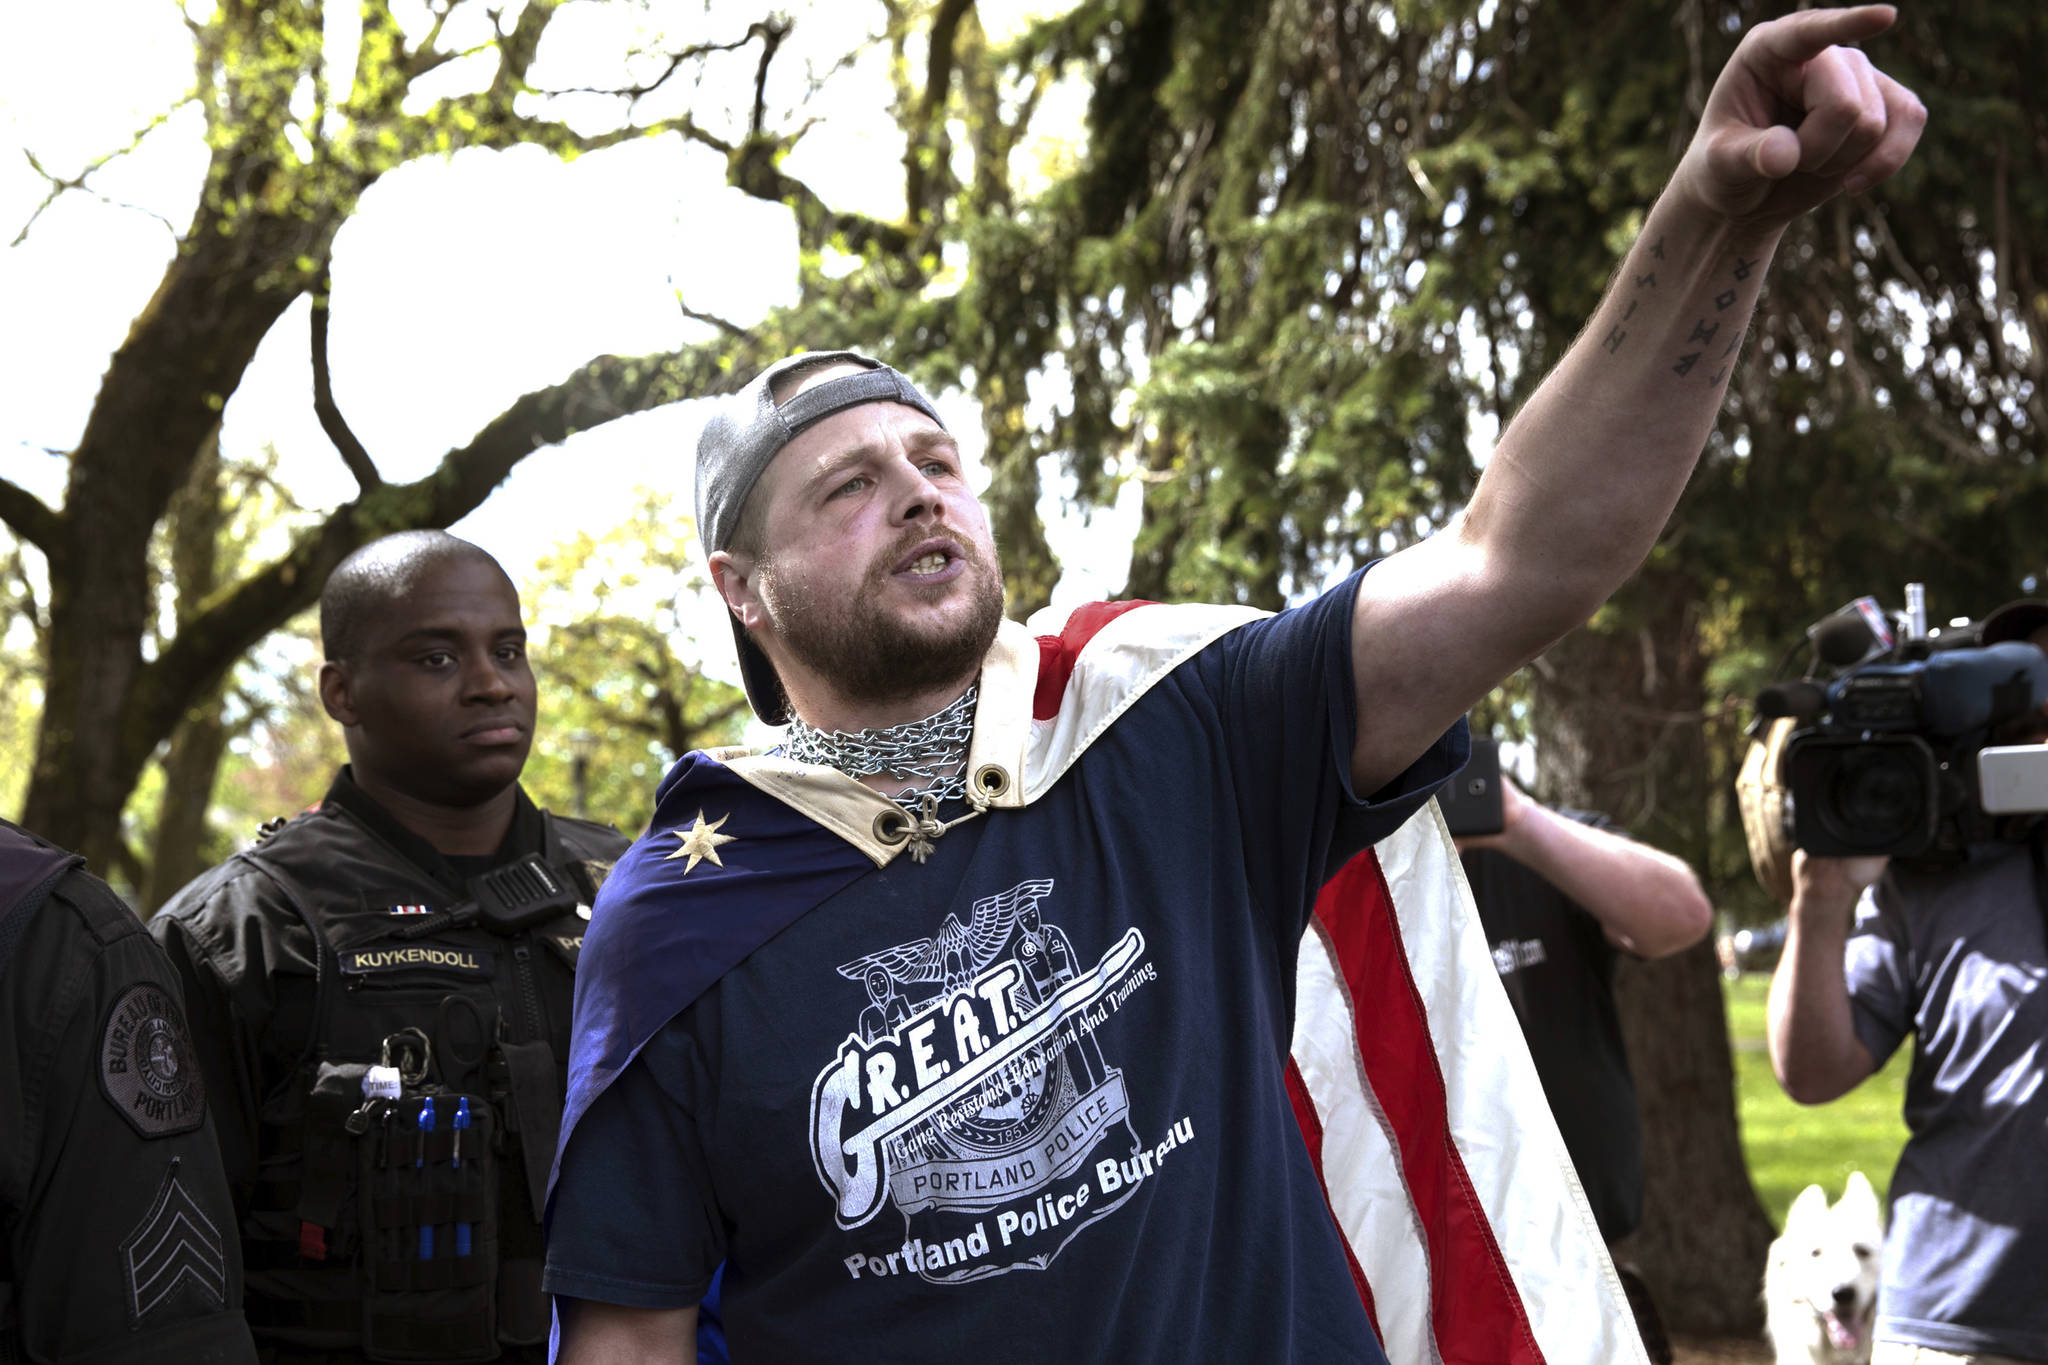 In an April 29 photo provided by John Rudoff, Jeremy Joseph Christian, right, is seen during a Patriot Prayer organized by a pro-Trump group in Portland, Ore. (John Rudoff via AP)